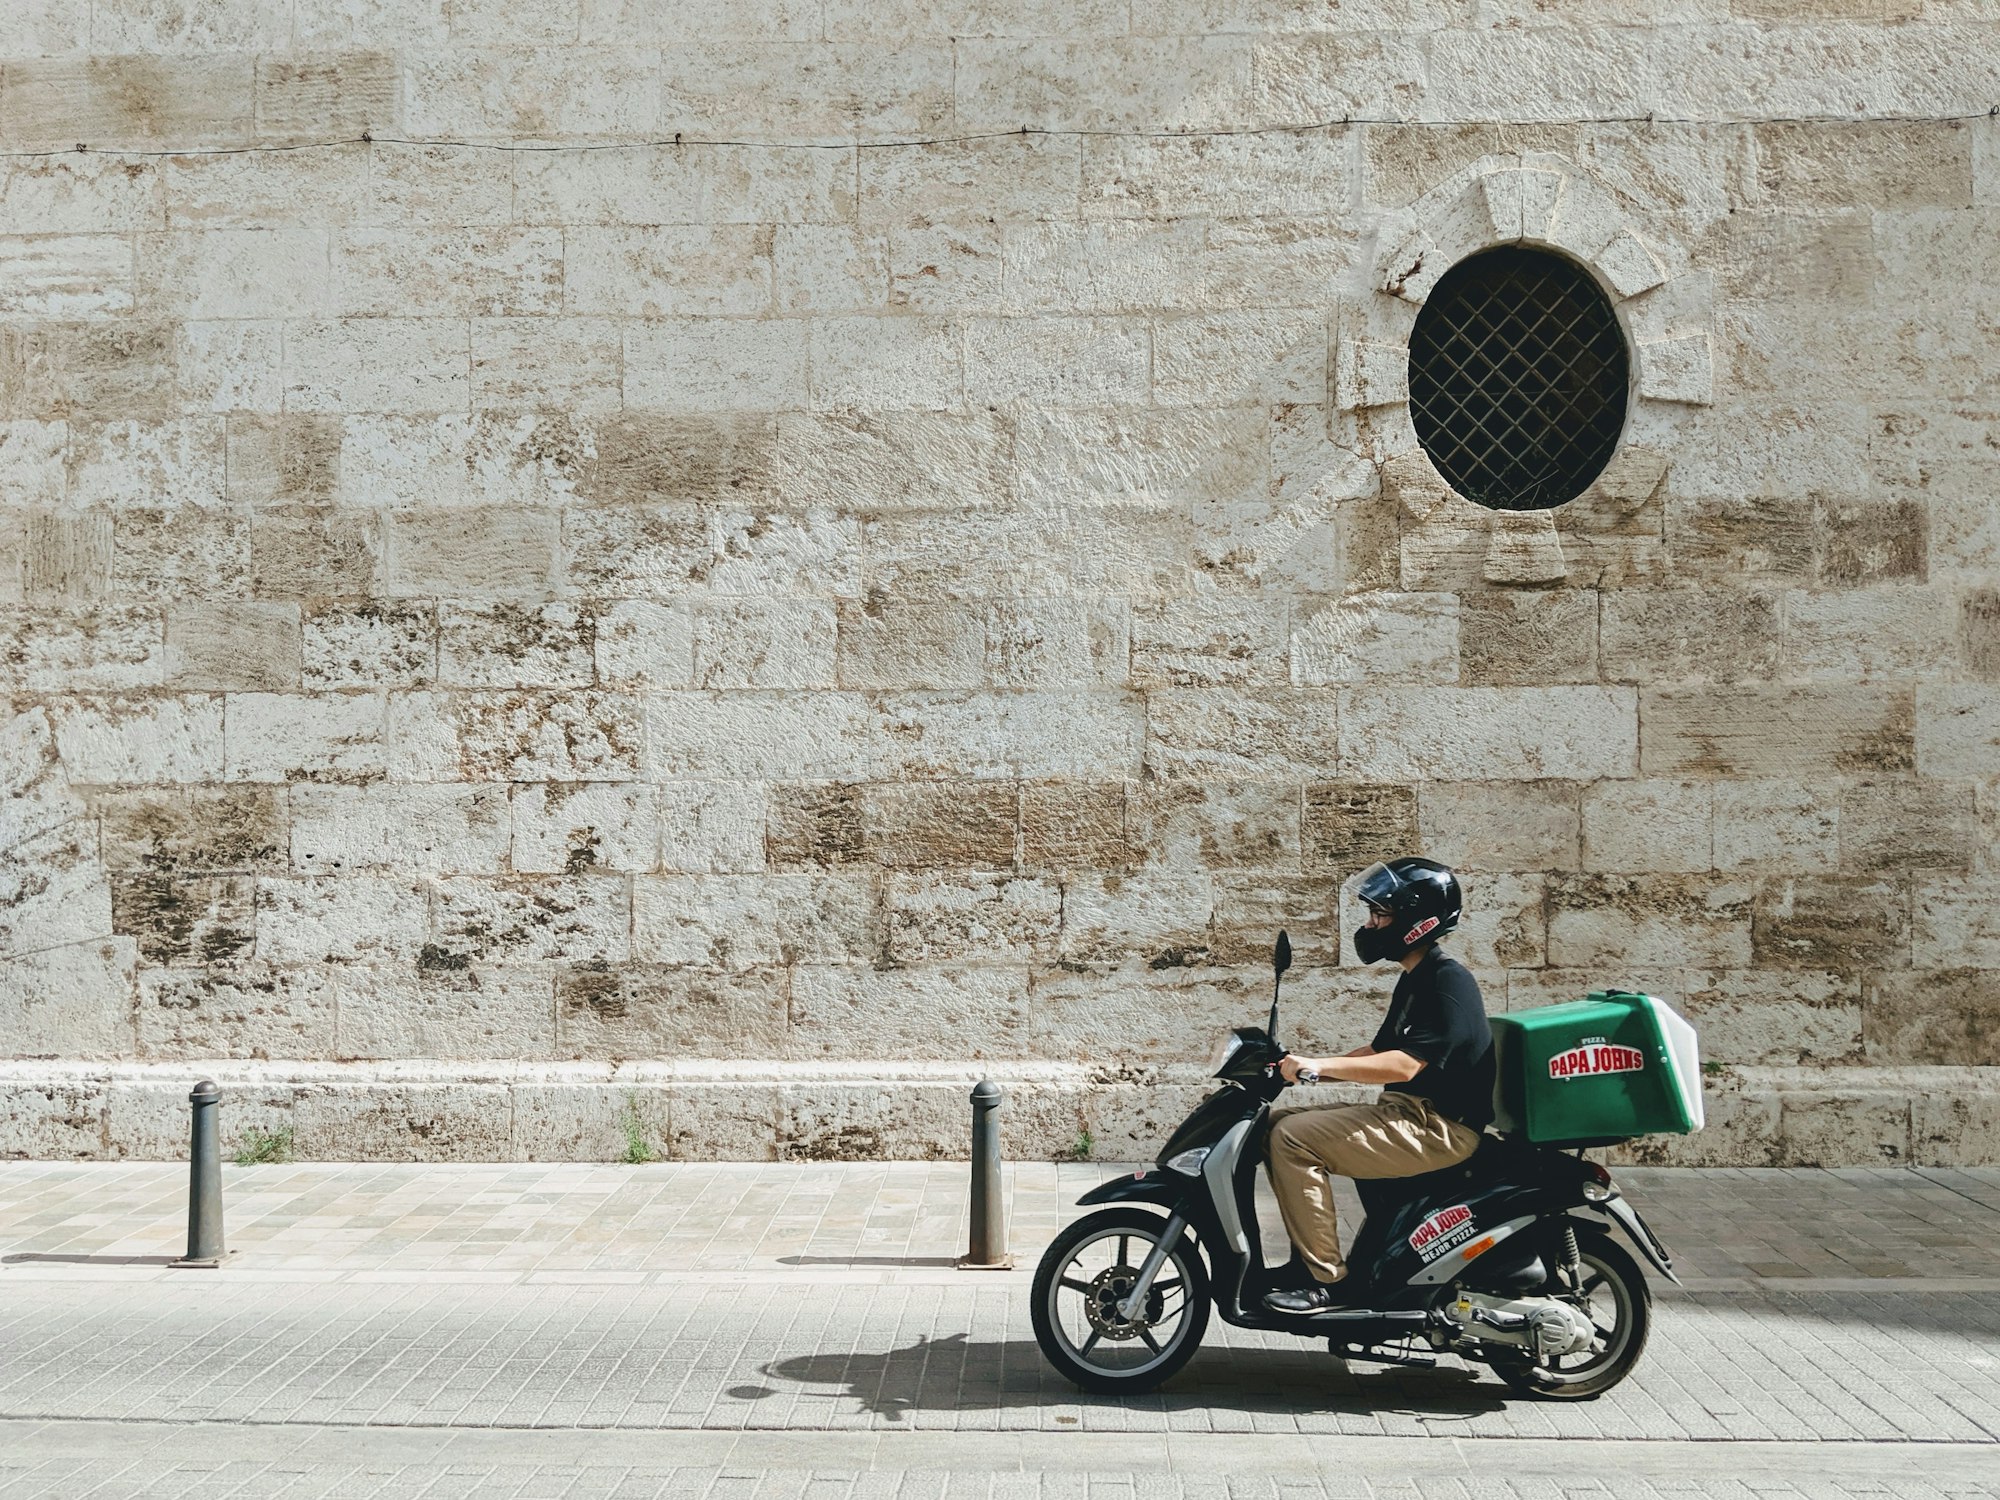 Delivery boy on the old streets of Valencia